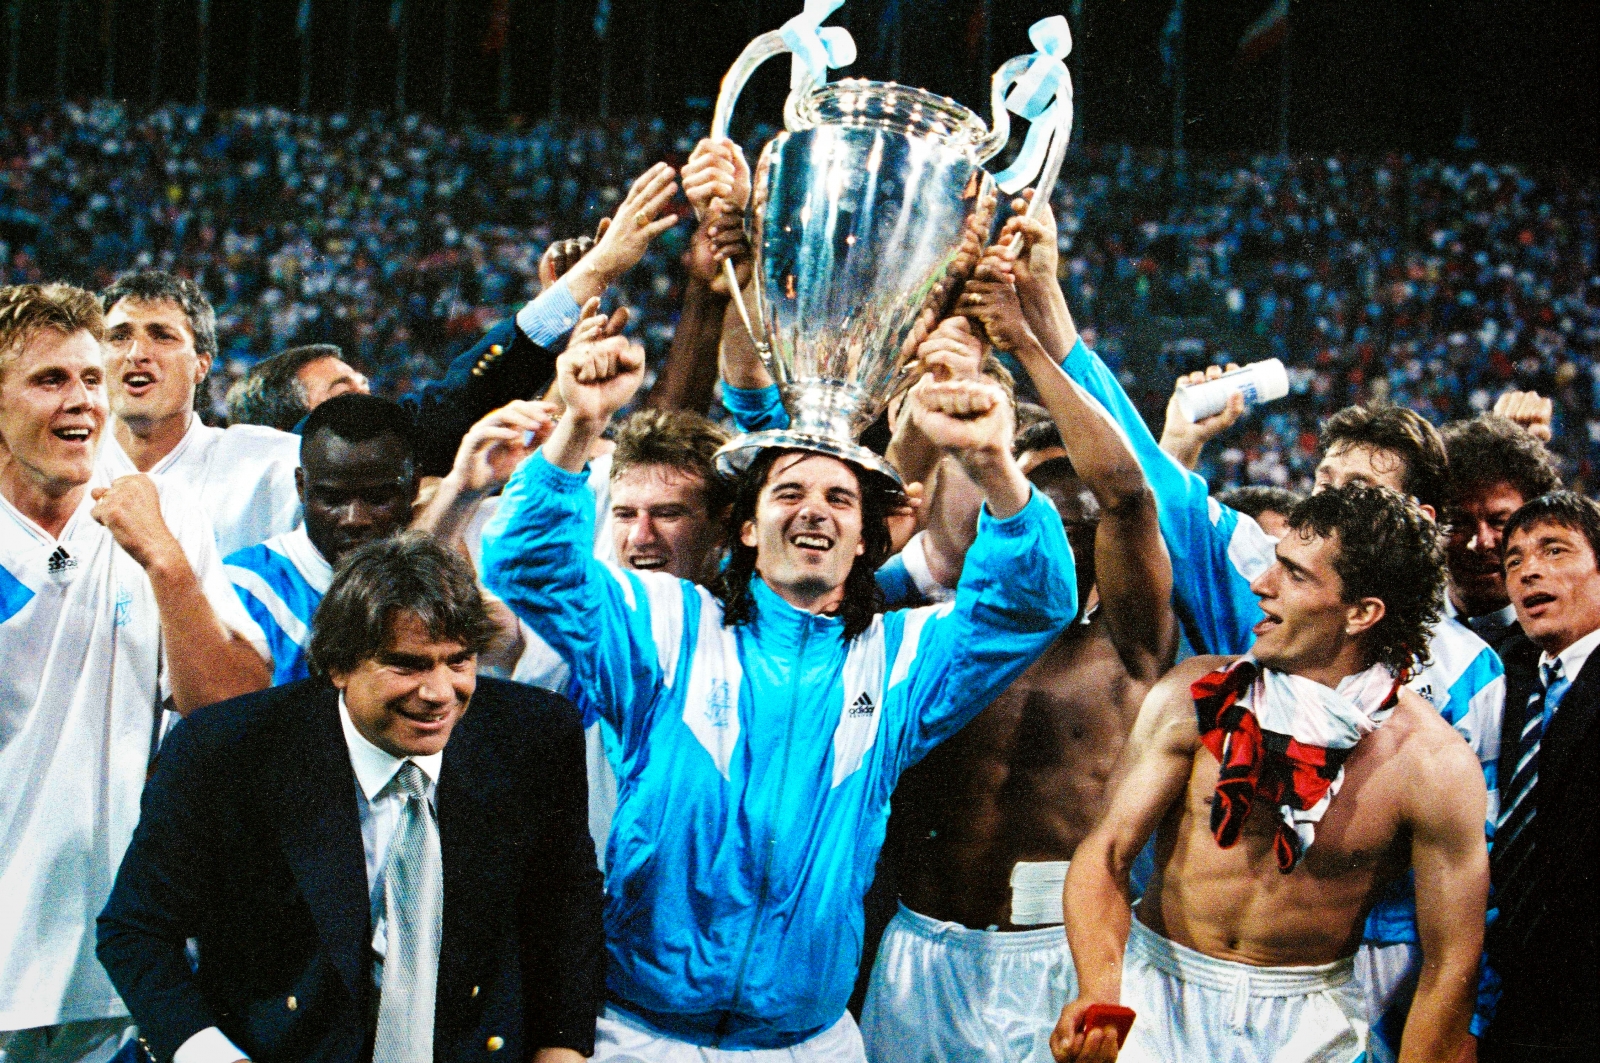 marseille-fc-in-the-champions-league-some-facts-about-the-french-club-in-the-prestigious-uefa-competition